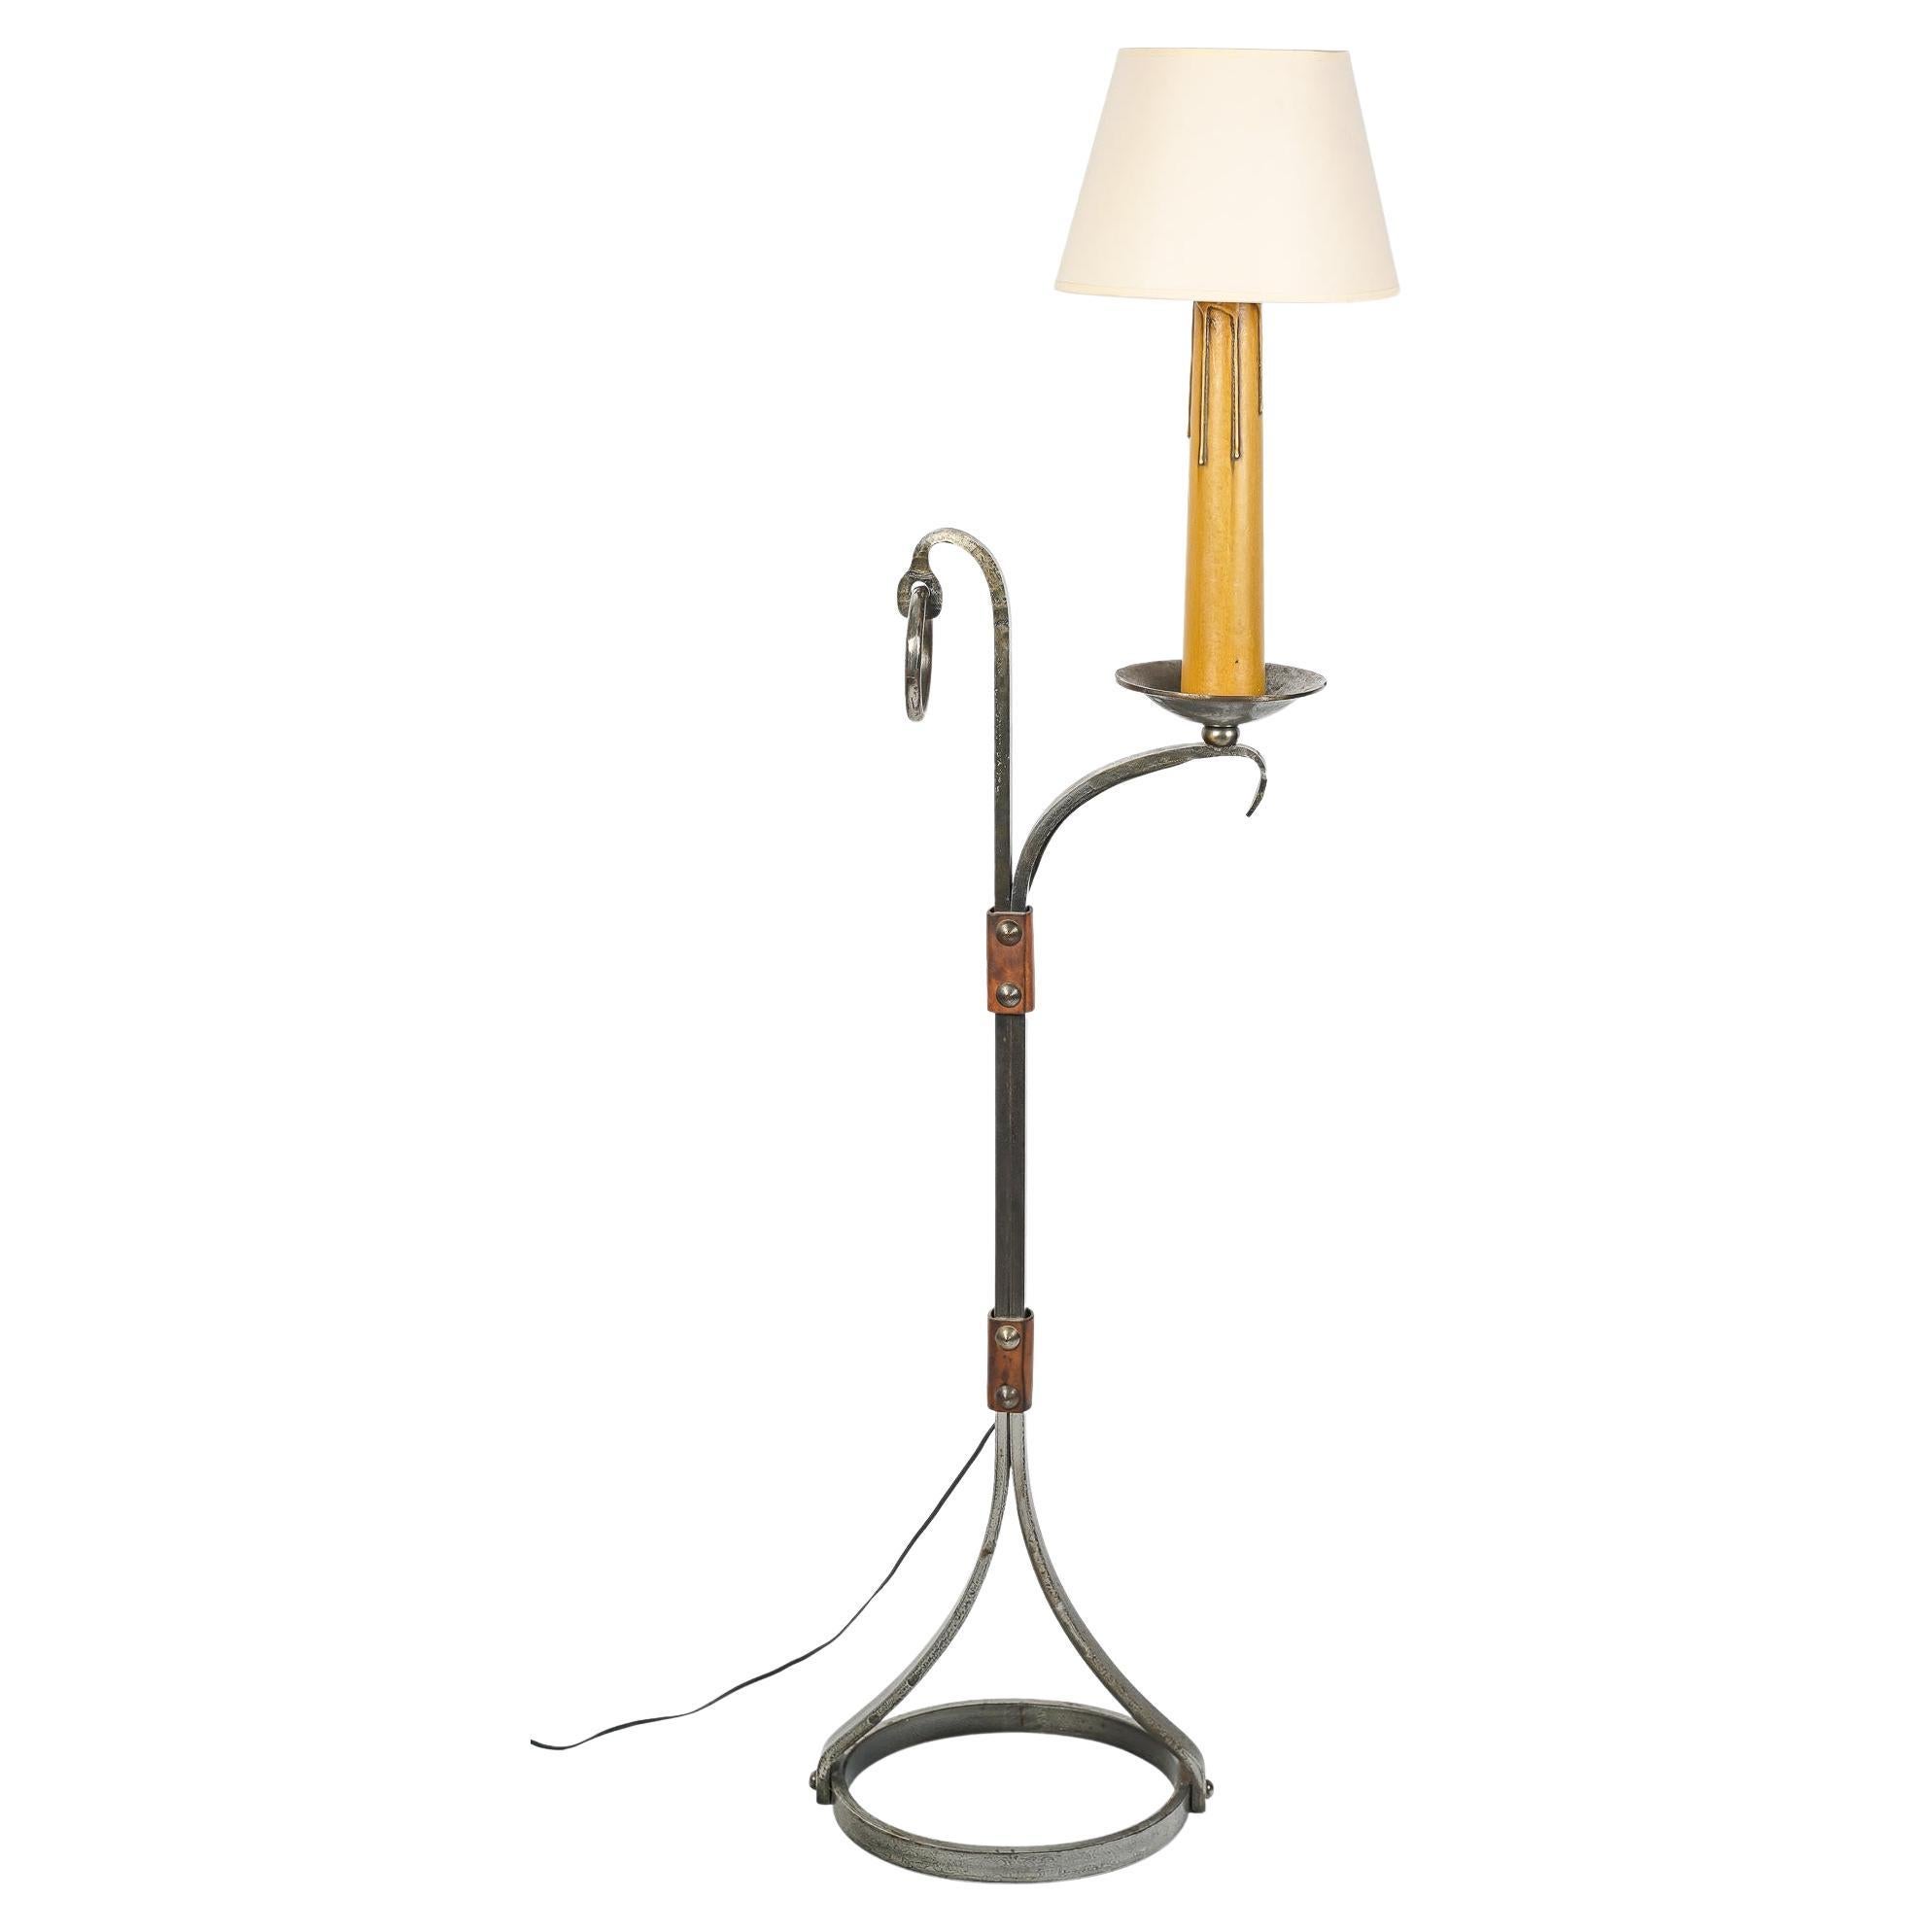 Wrought Iron and Copper Floor Lamp from the 1960s